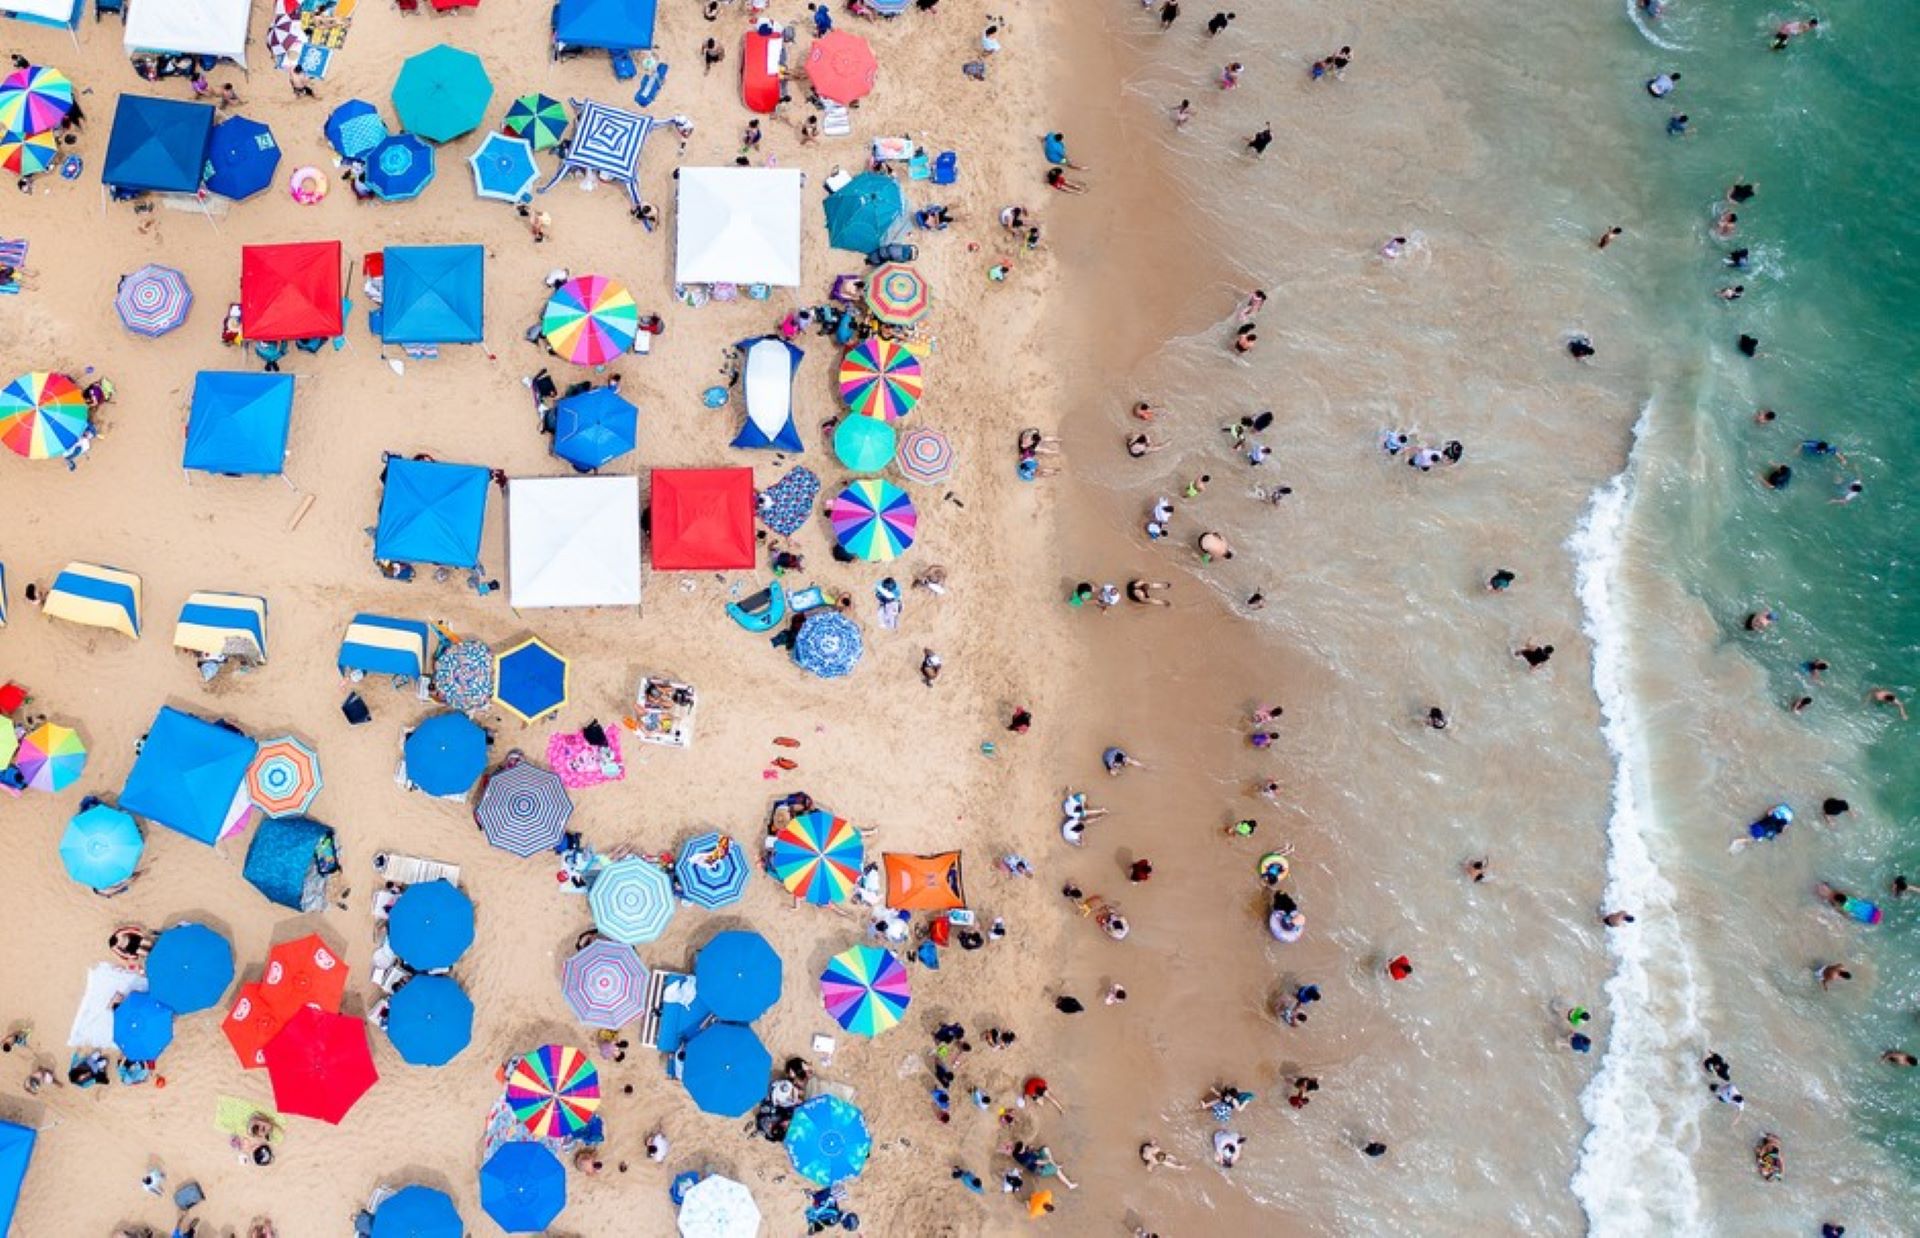 Viral photo shows infuriating aftermath of beachgoers’ actions: ‘I ...